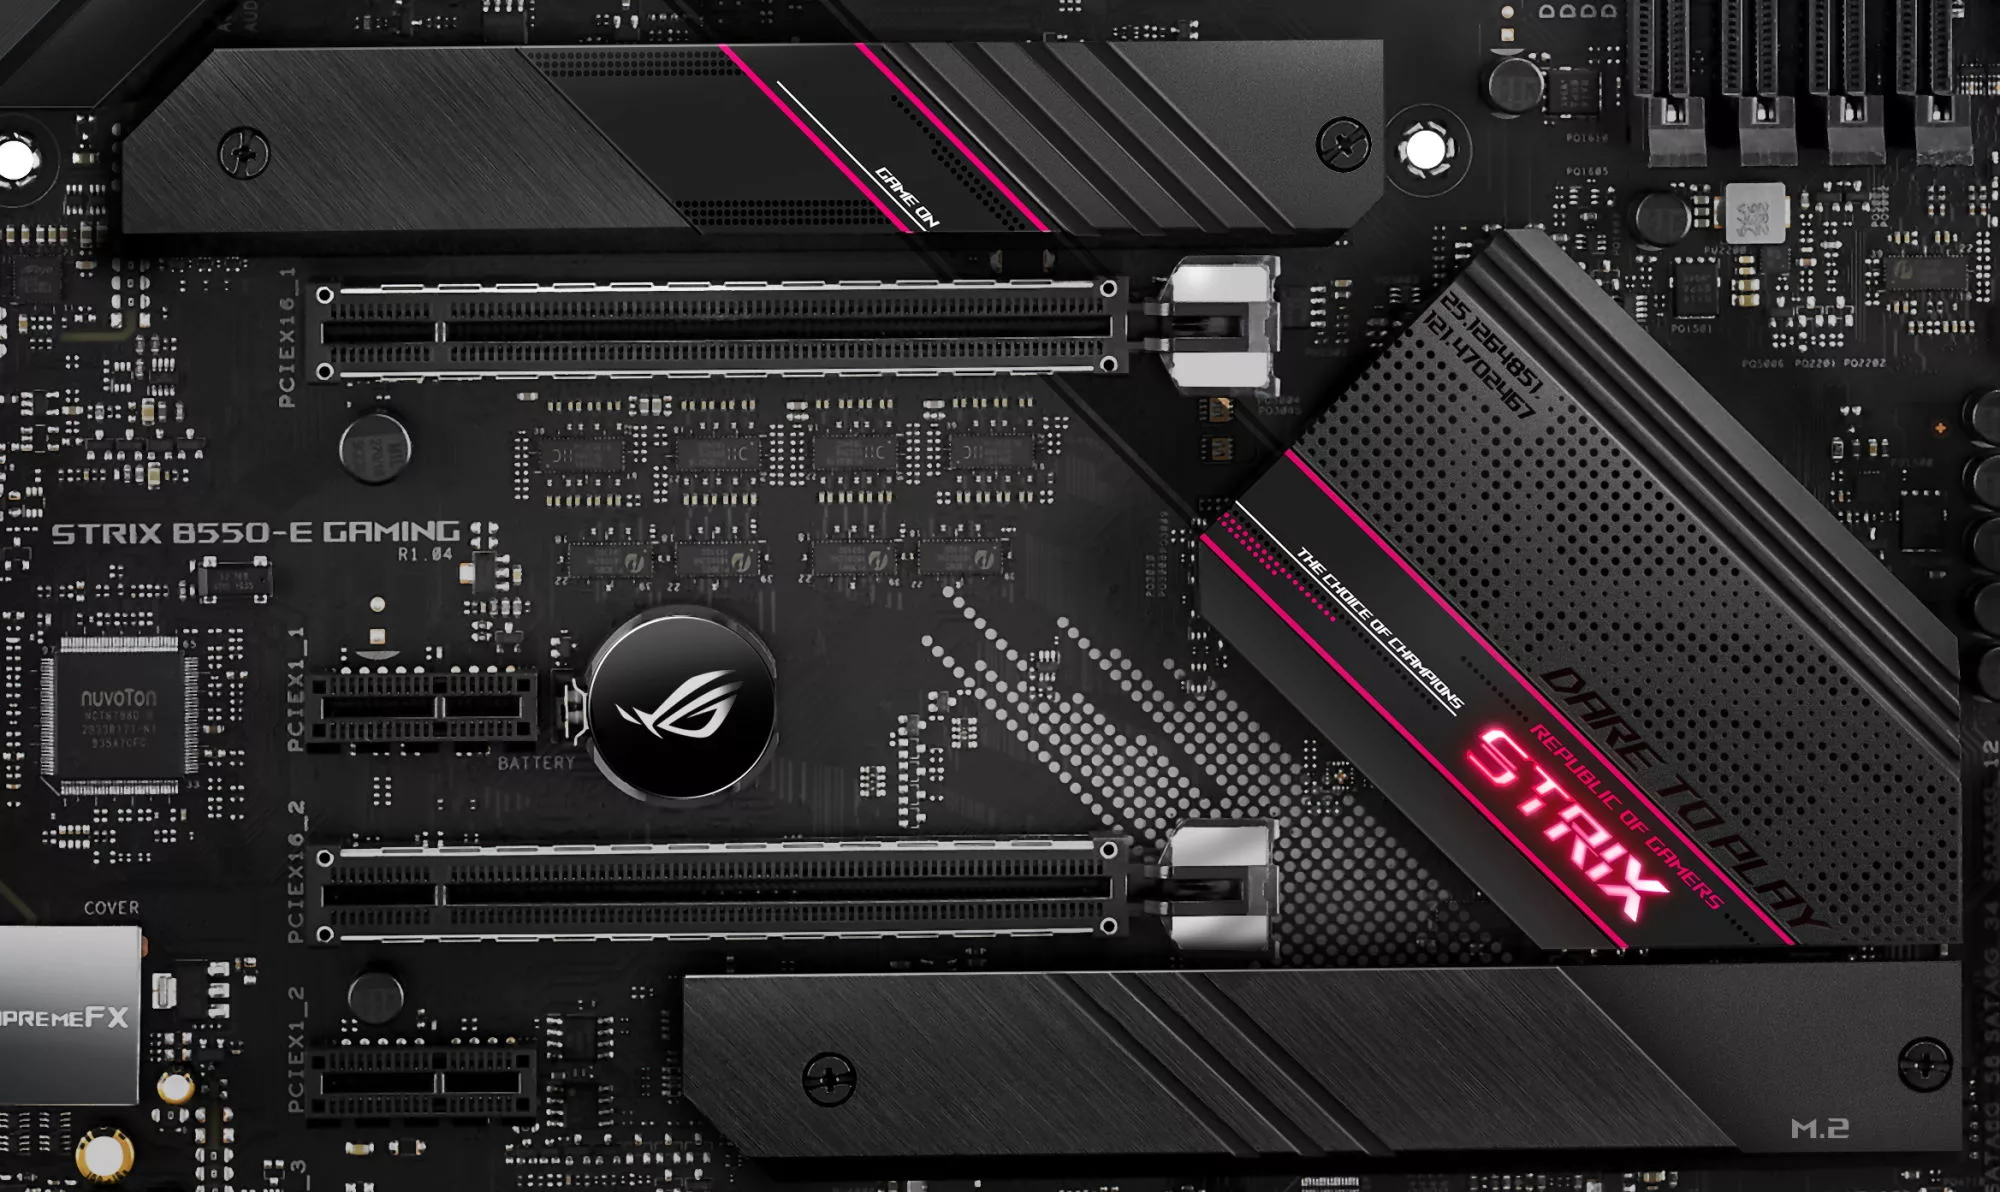 ROG Strix B550 motherboards power up mainstream AMD gaming builds